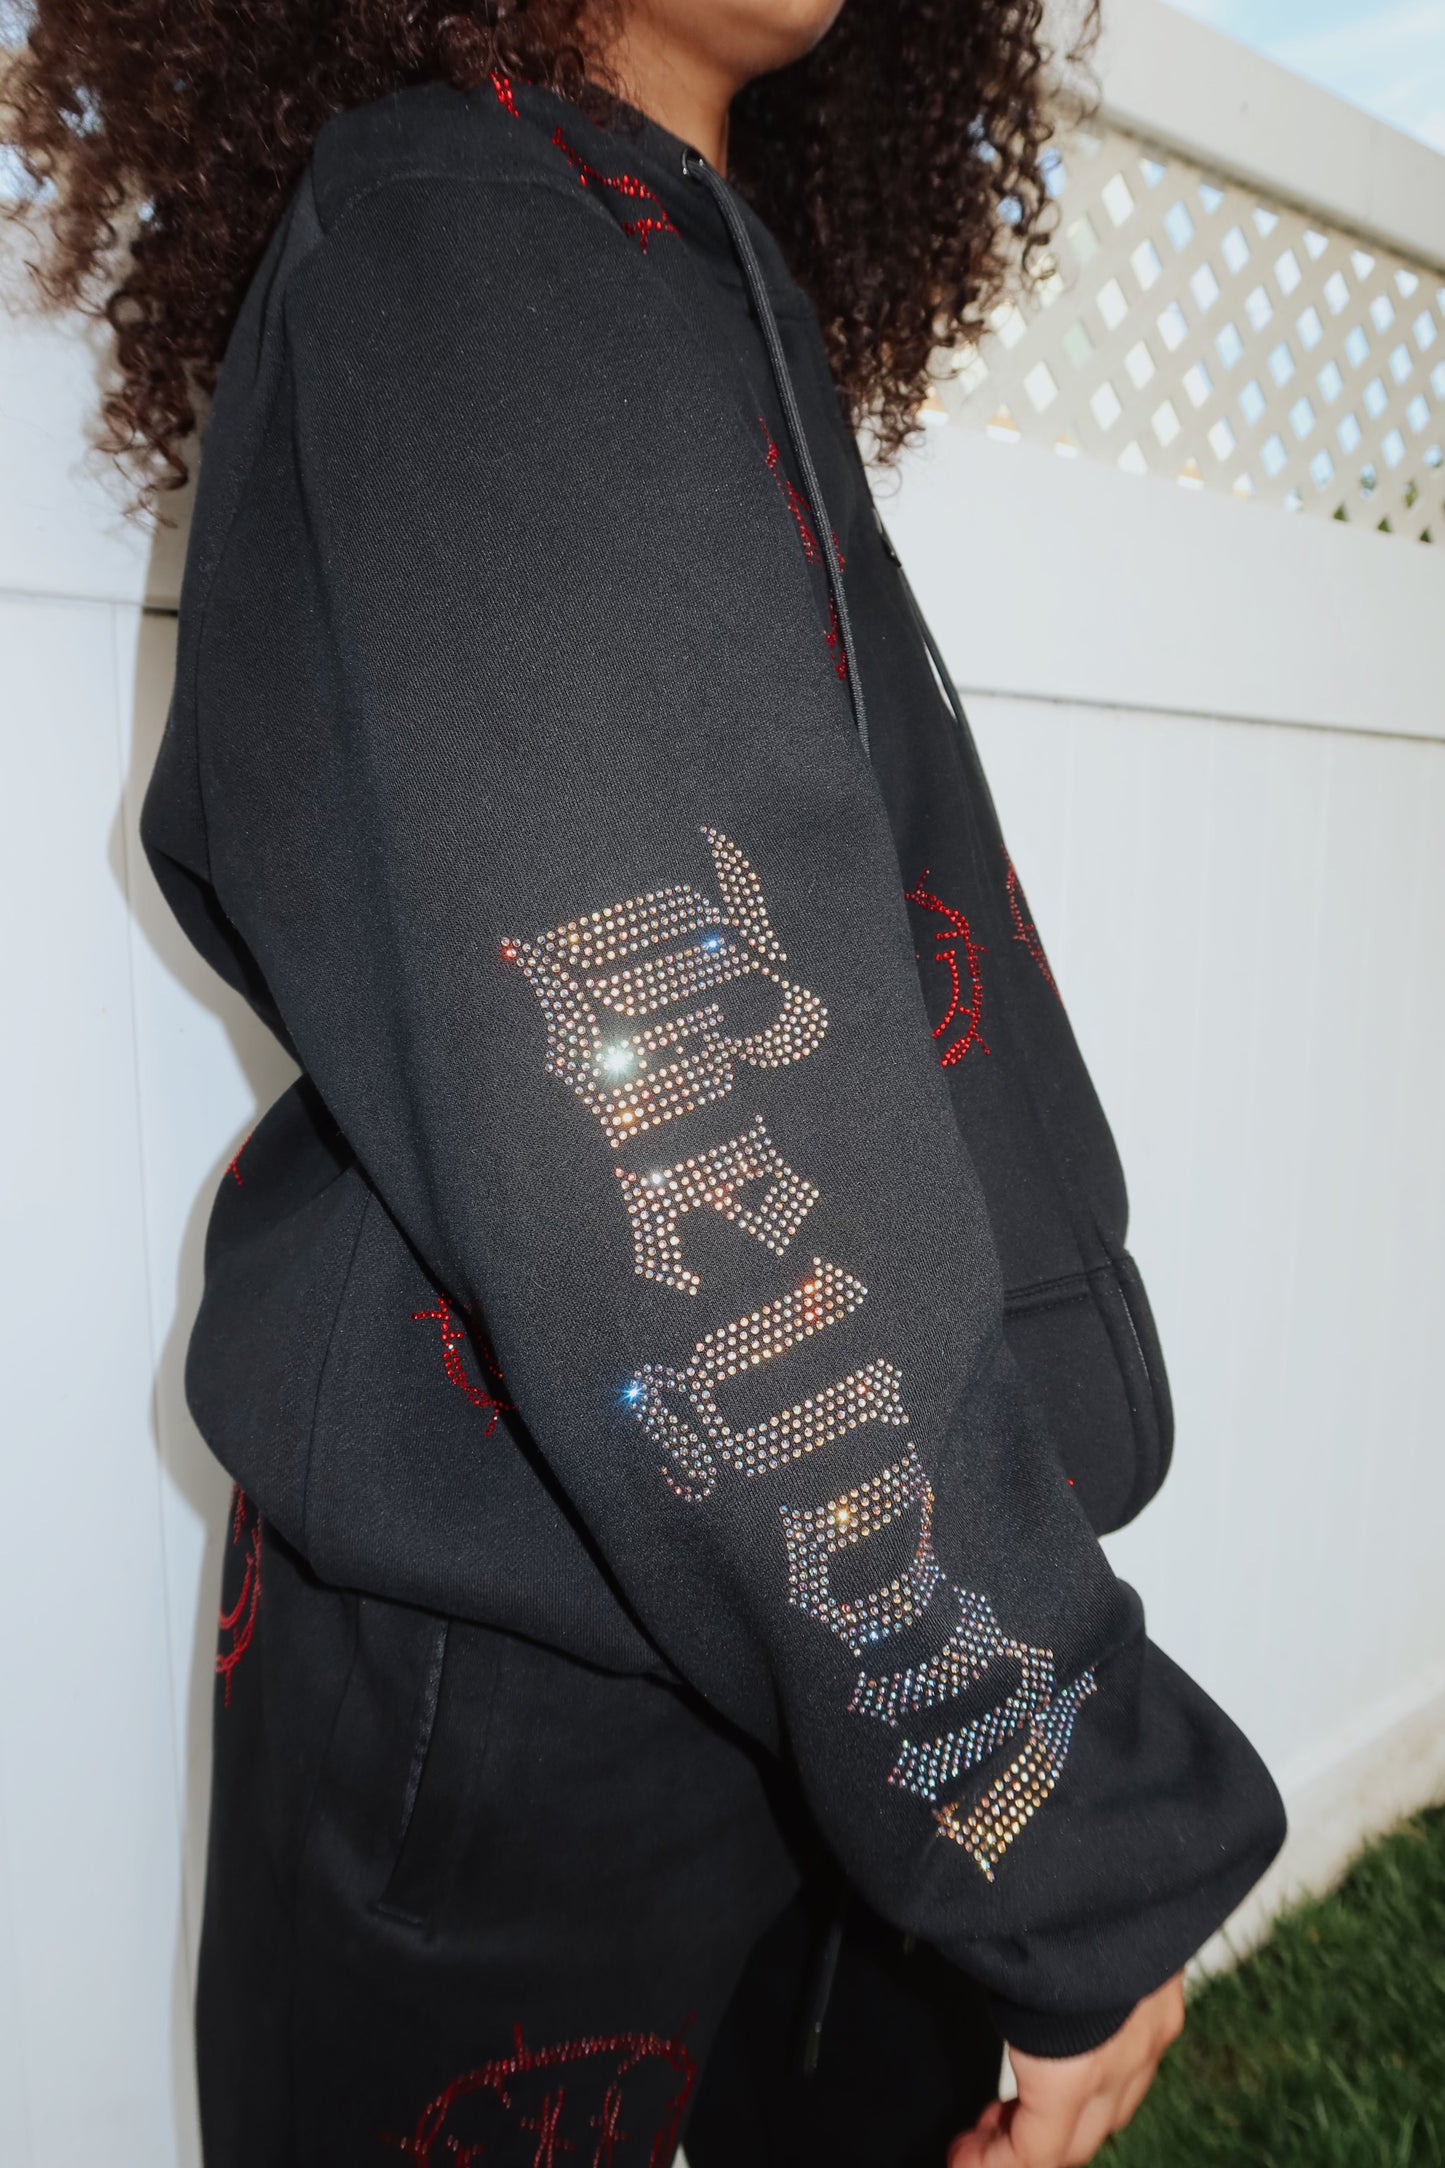 NEW! Black Rhinestone Sweats: Barbed Wire Smiley Face